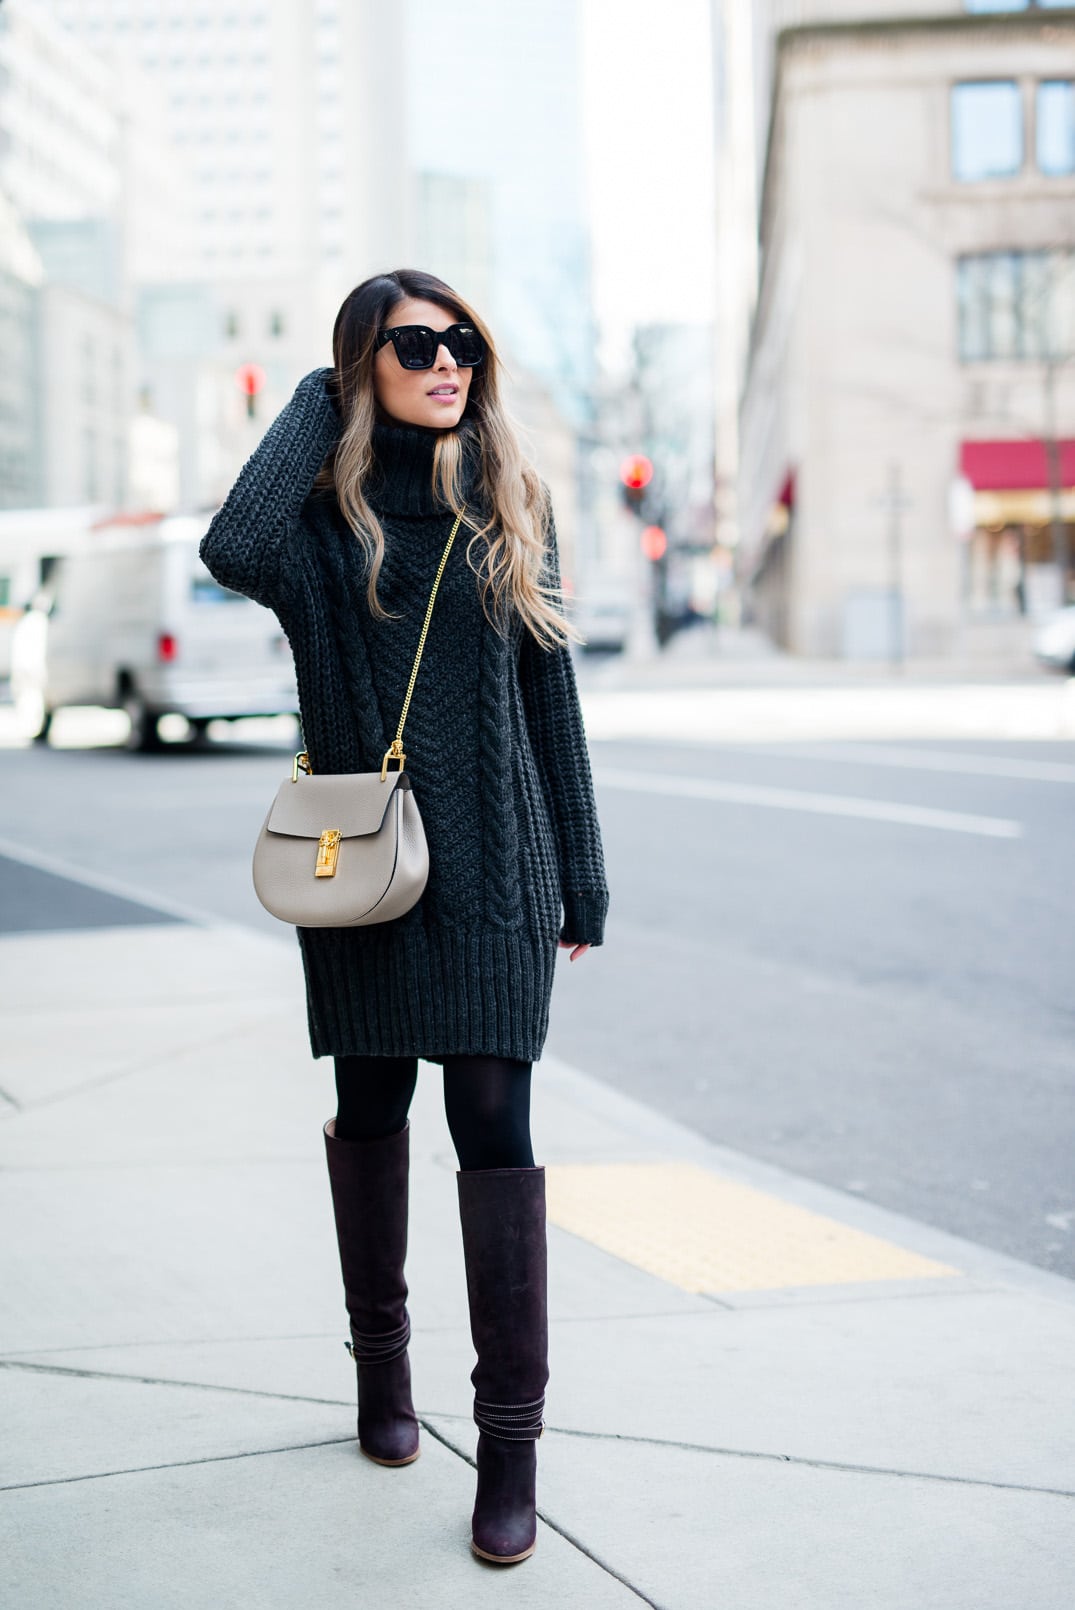 sweater dress with leggings and boots